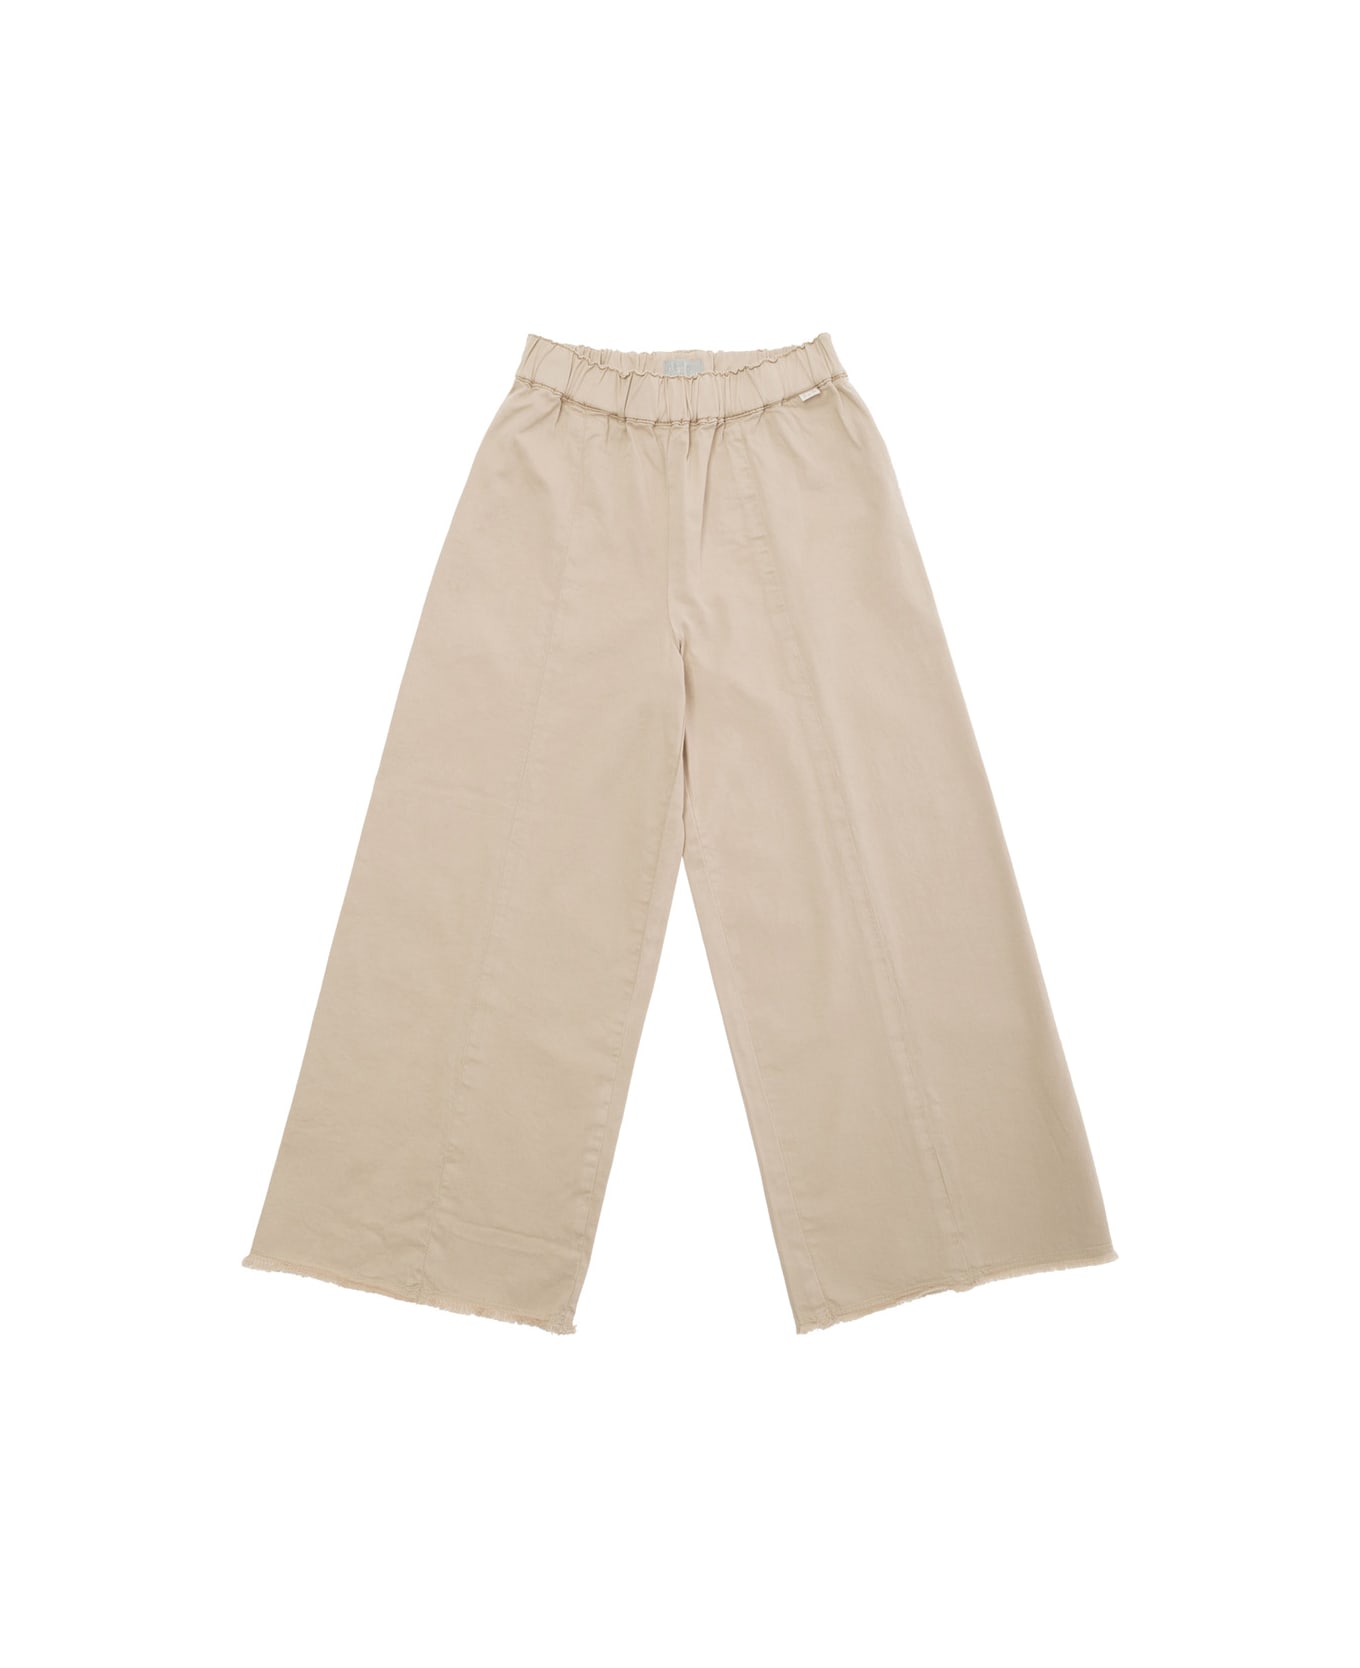 Il Gufo Beige Pants With Elastic Waistband In Stretch Cotton Girl - Beige ボトムス